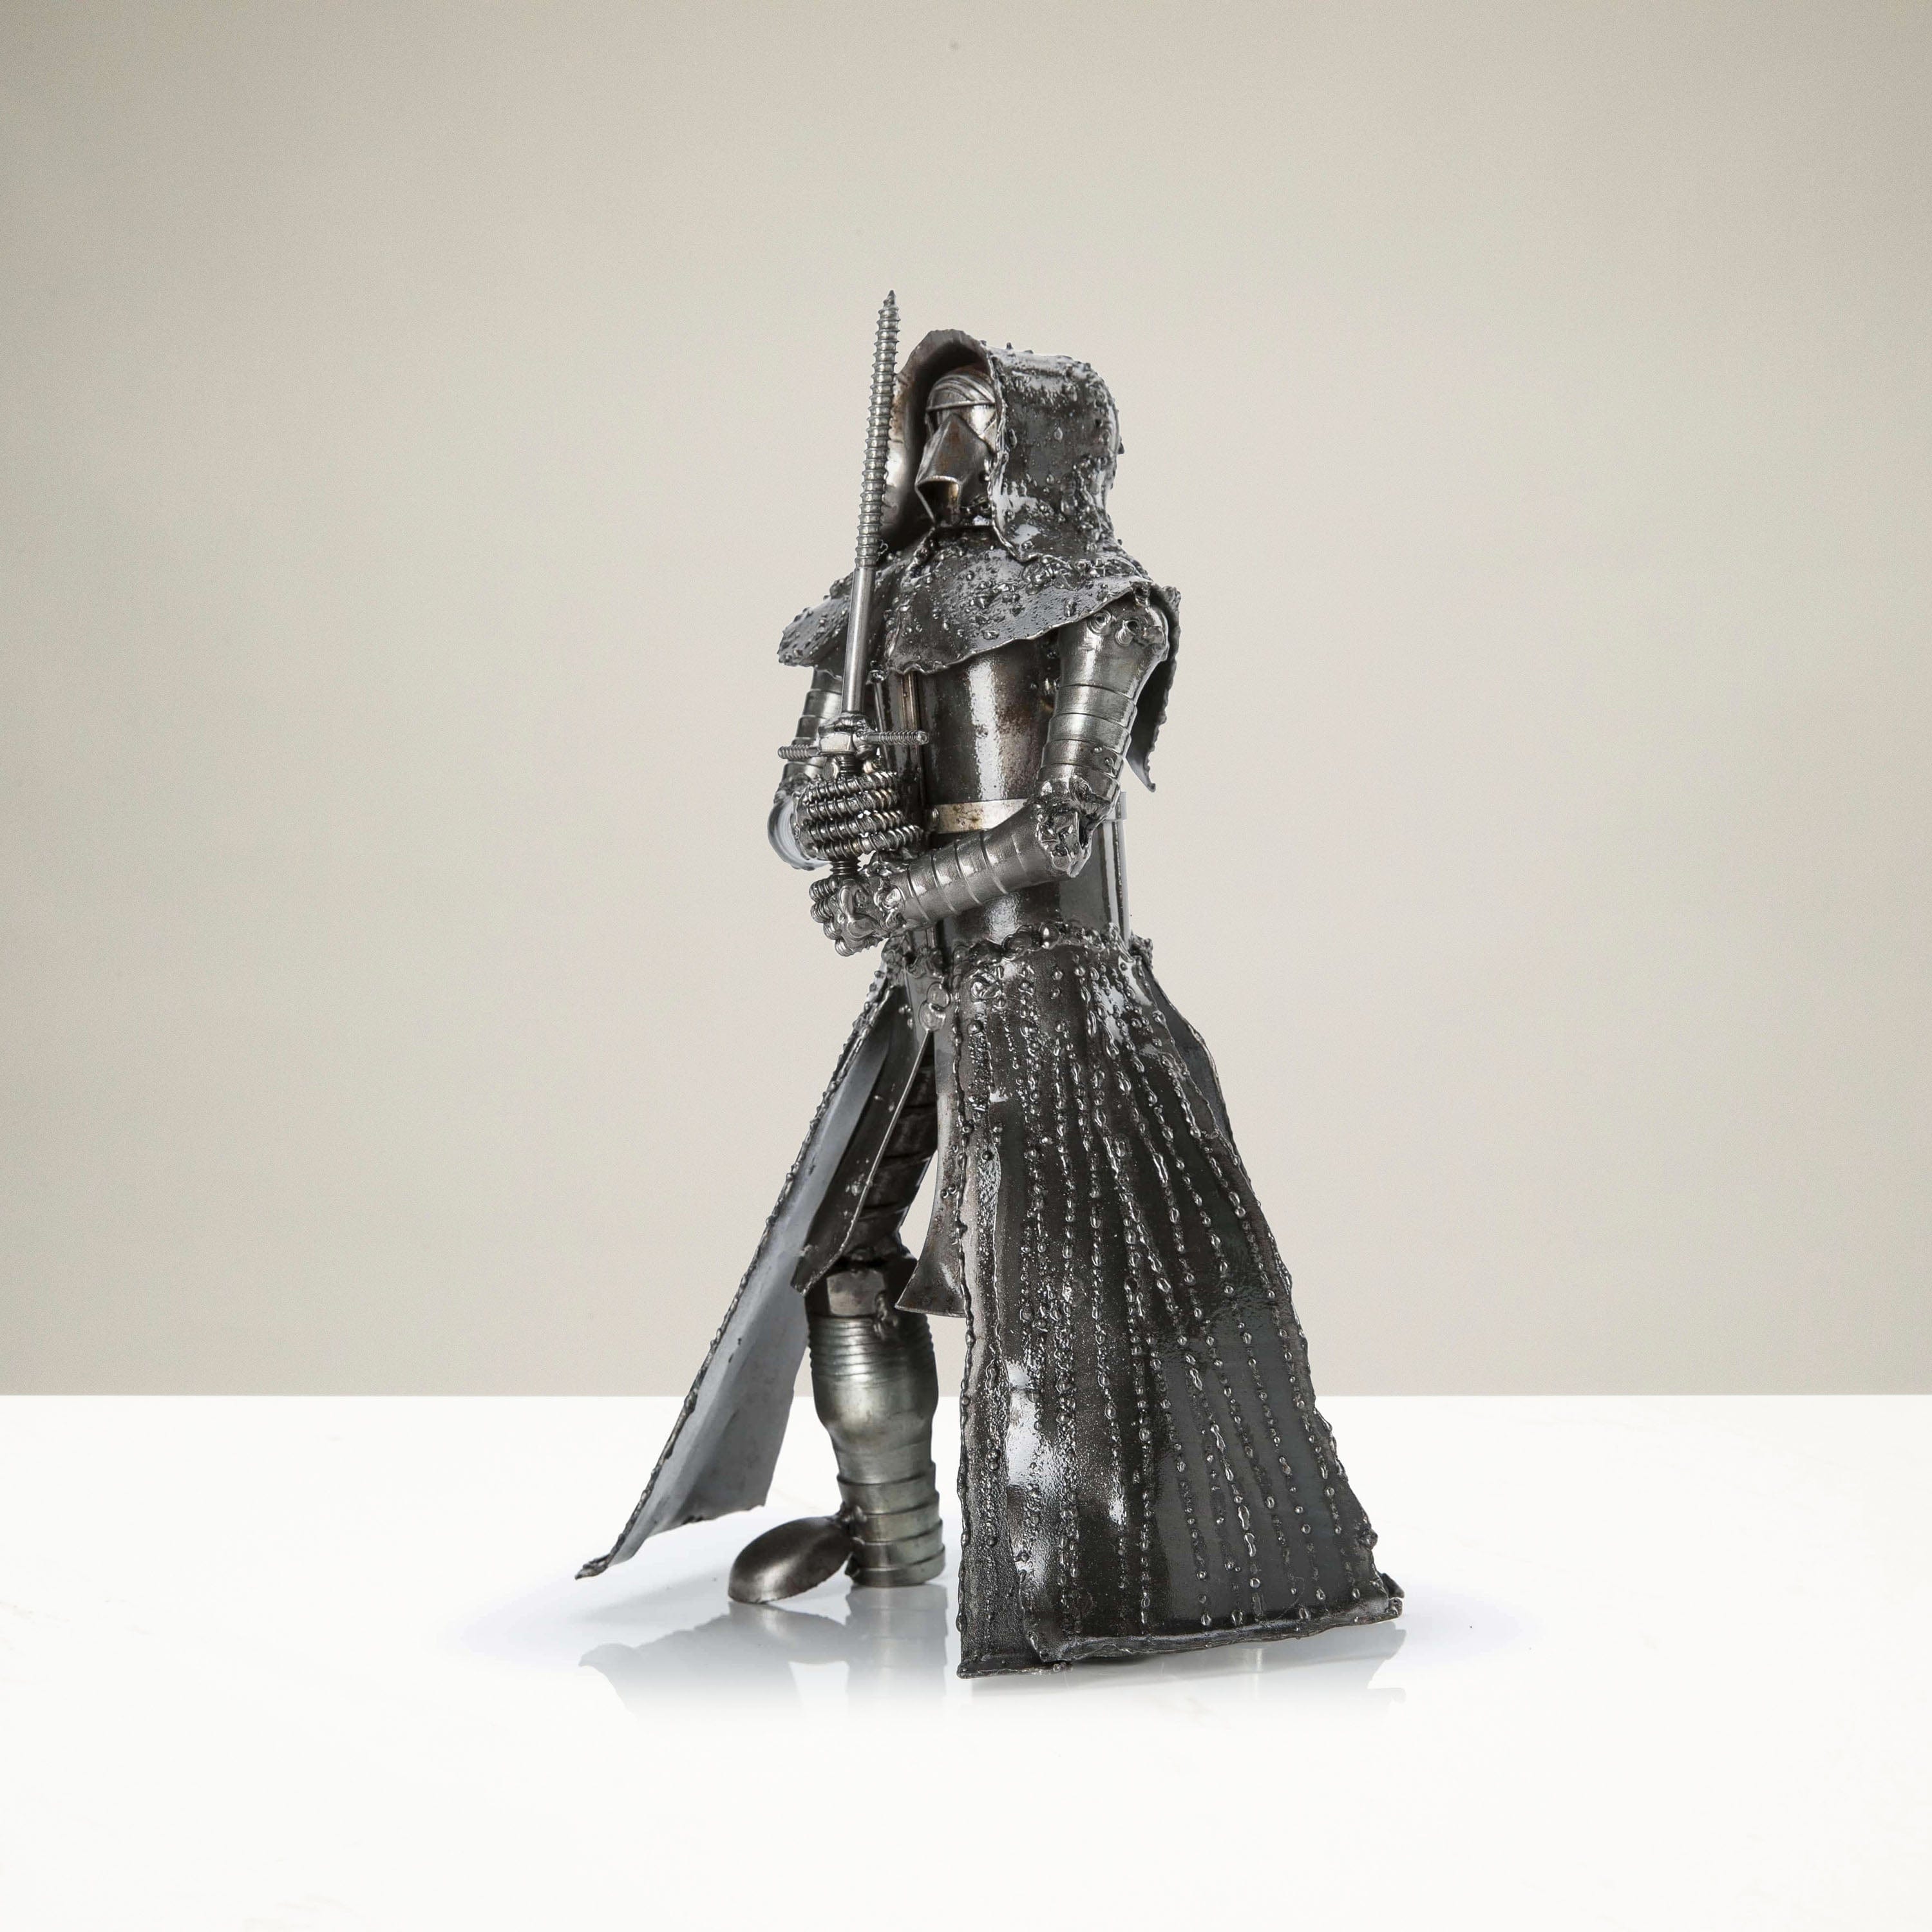 Kalifano Recycled Metal Art Kylo Ren with Sword Inspired Recycled Metal Sculpture RMS-700KR-N